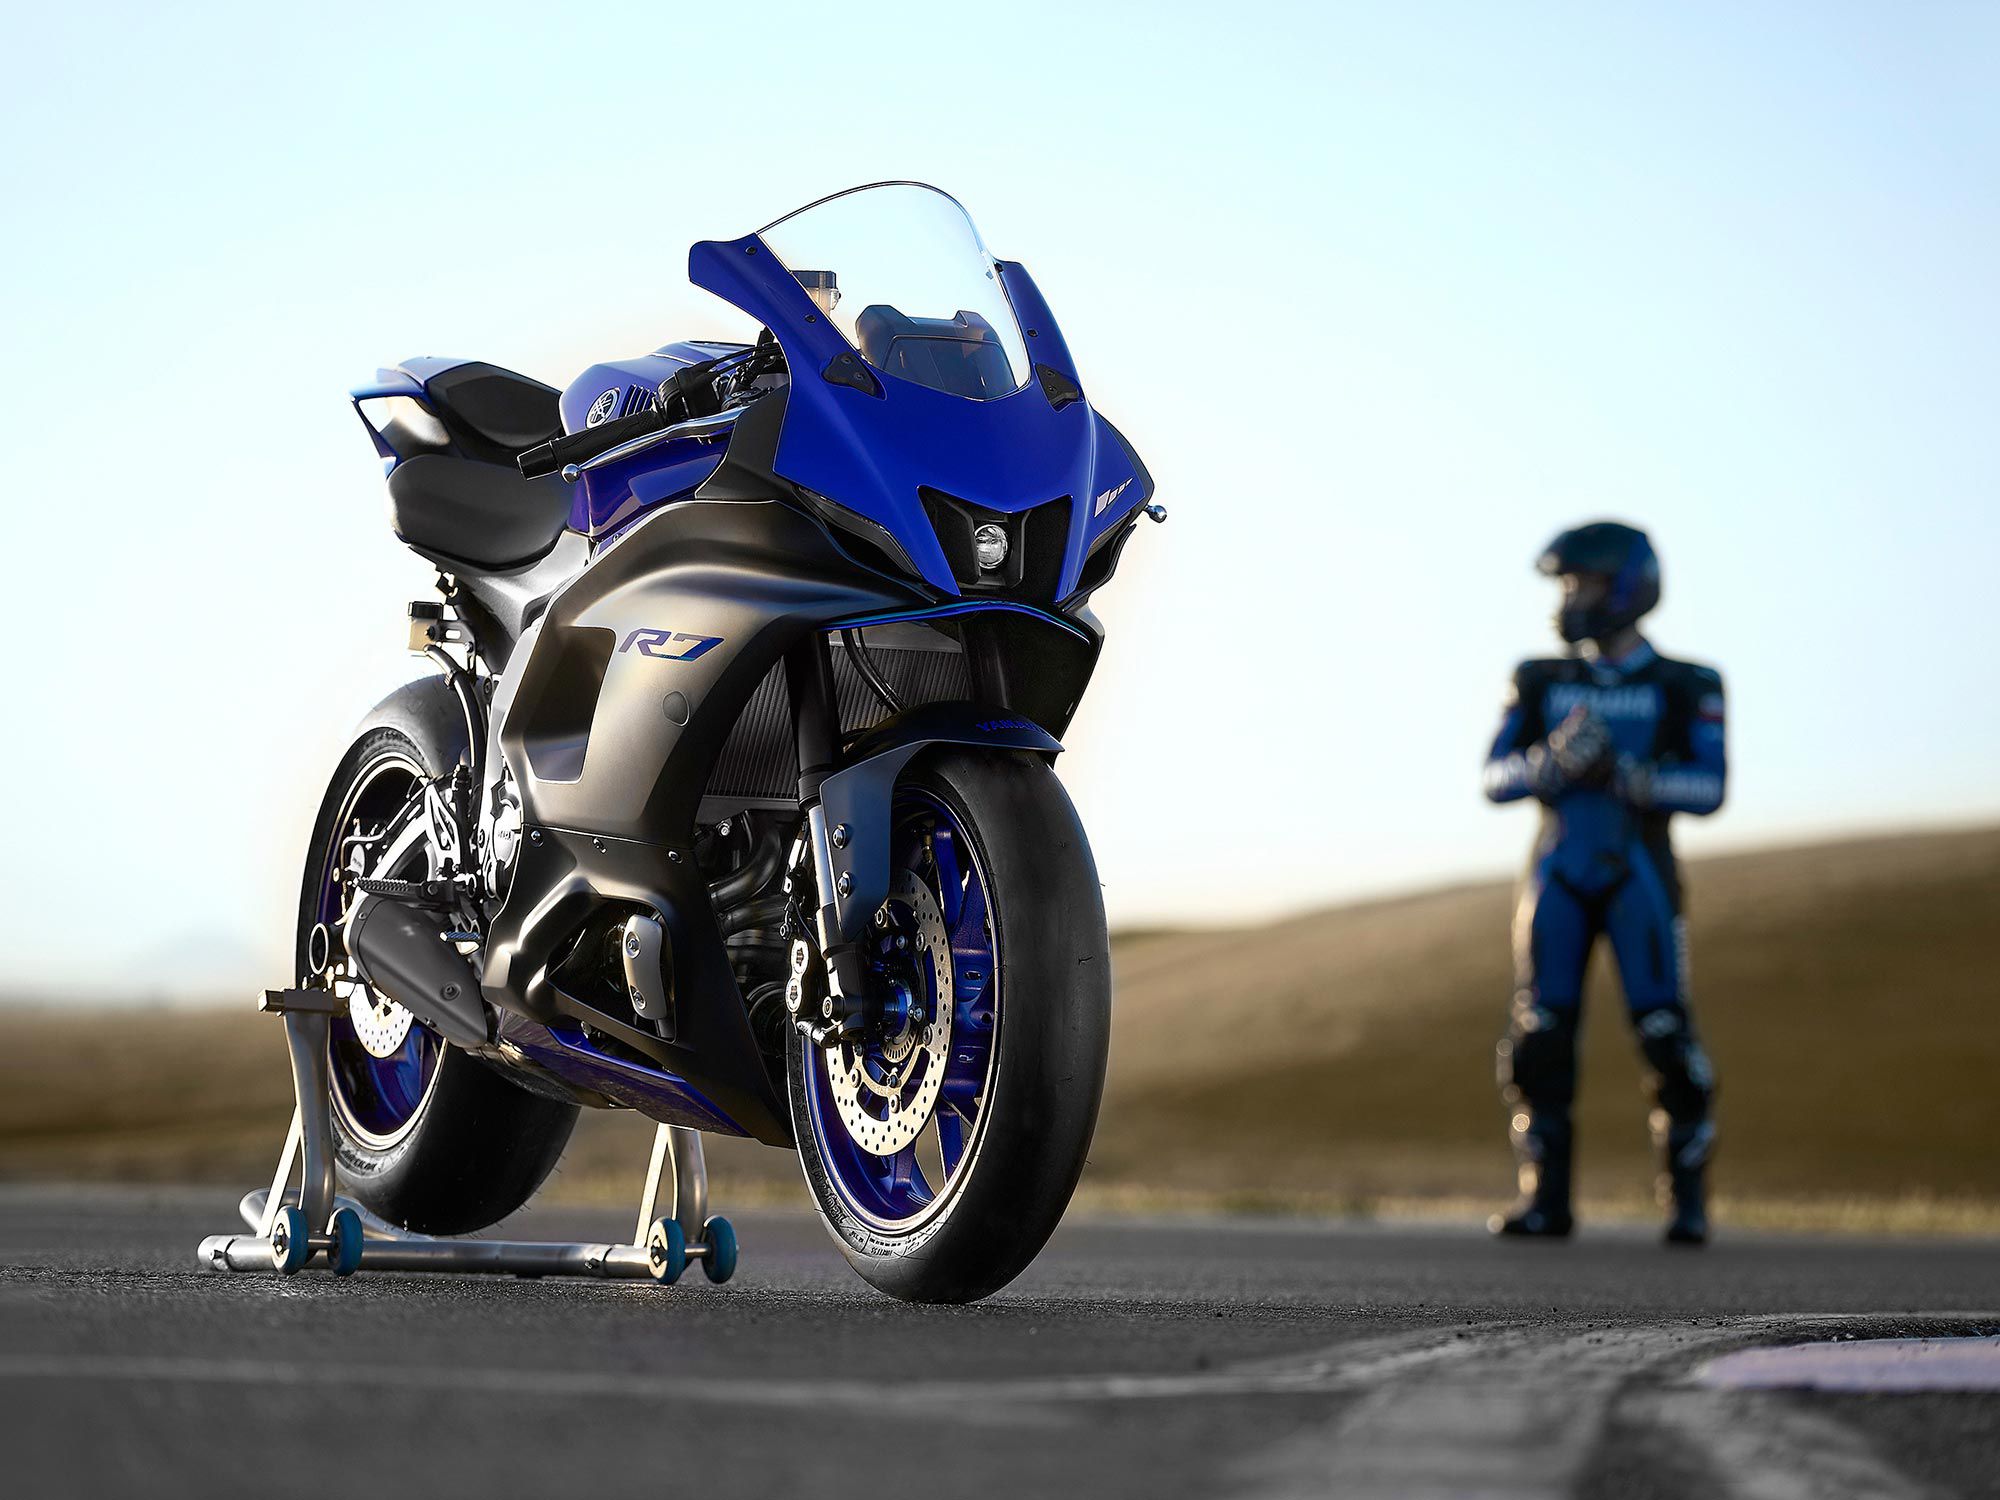 The YZF-R7 was designed as a natural steppingstone for Yamaha riders who want to move up from the YZF-R3 sportbike.